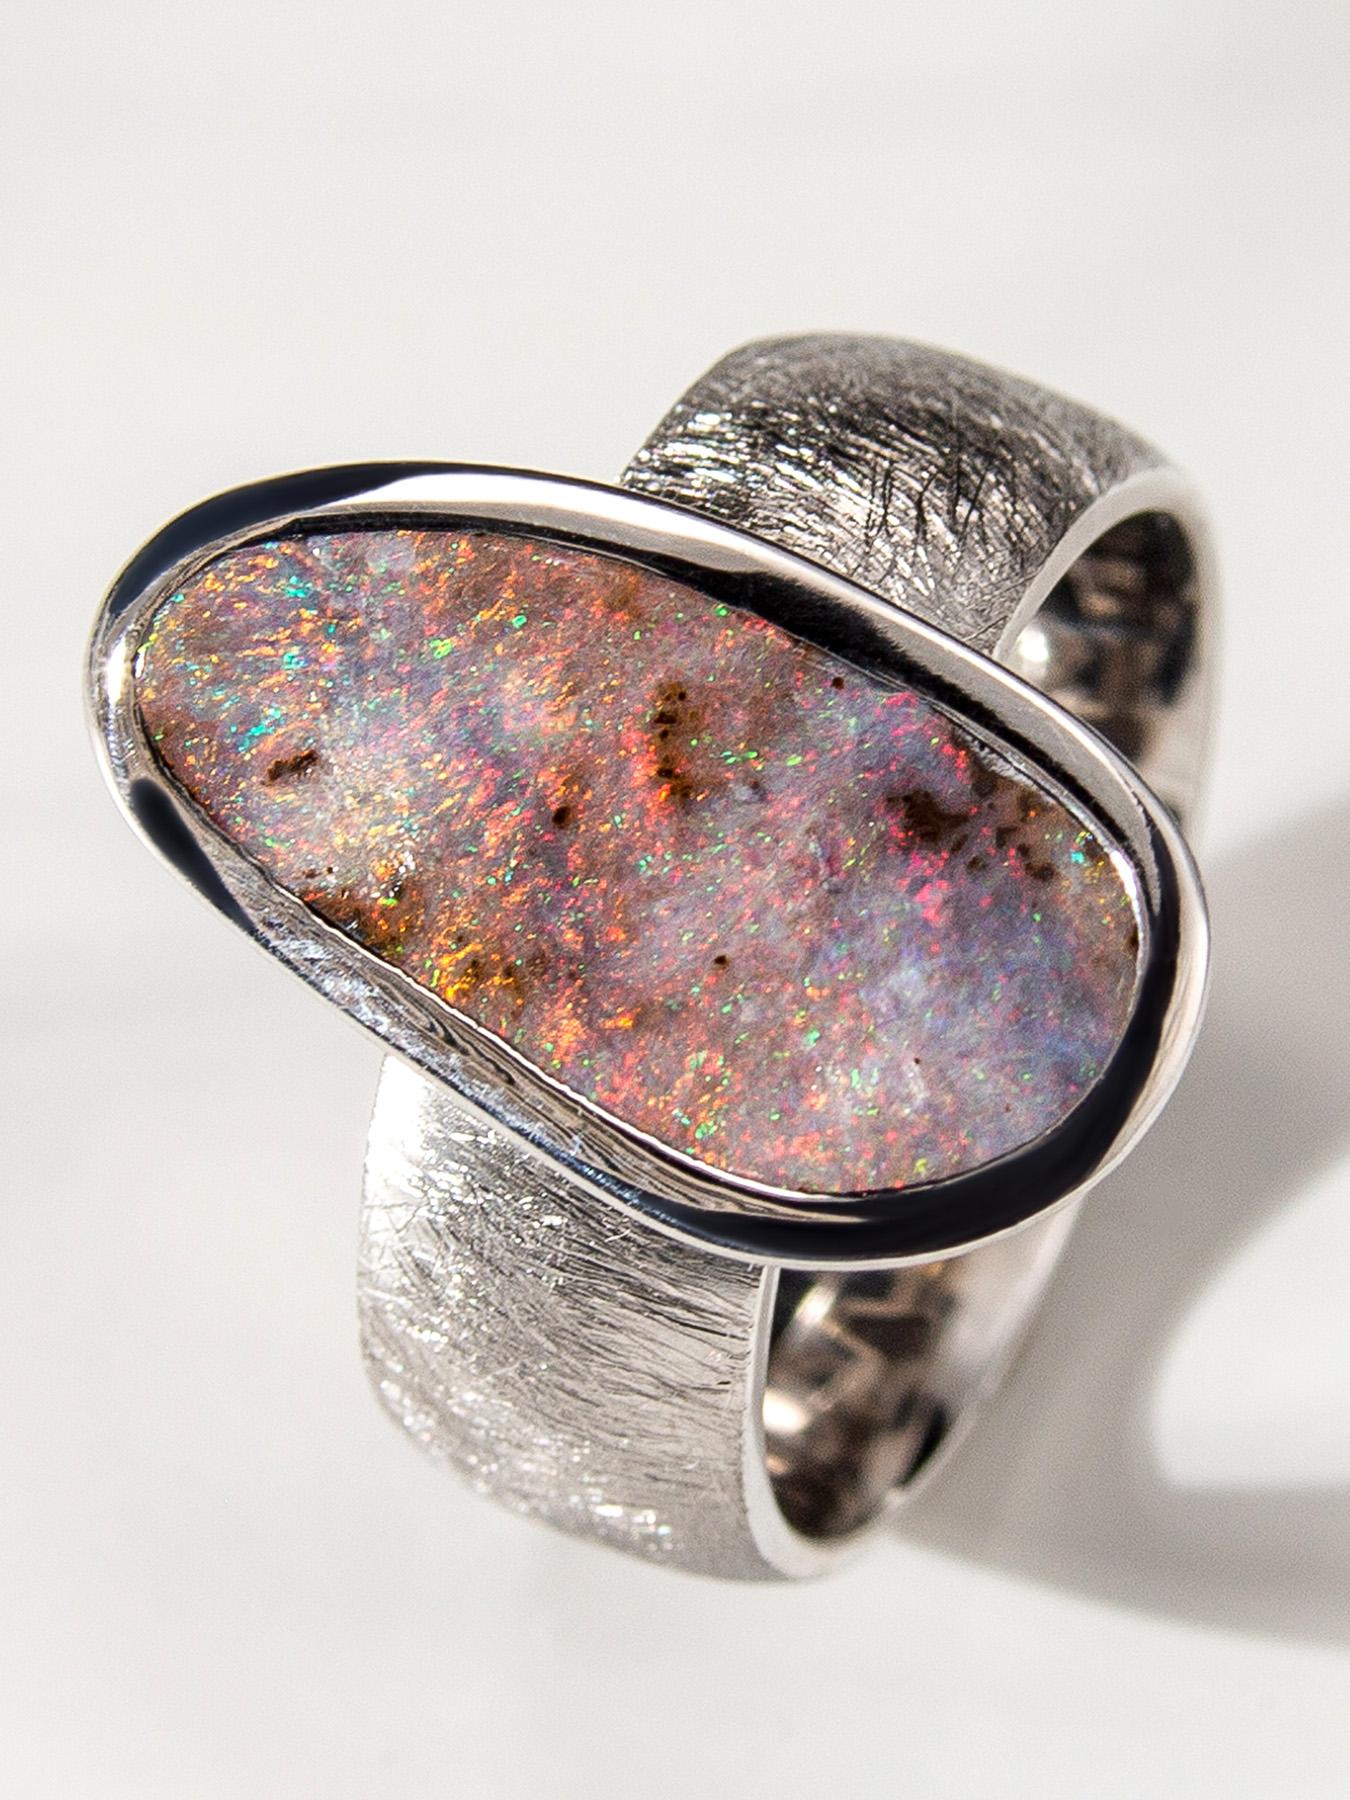 Cabochon Boulder Opal Scratched Silver Ring Cosmic Dust Australian Gemstone Jewelry For Sale